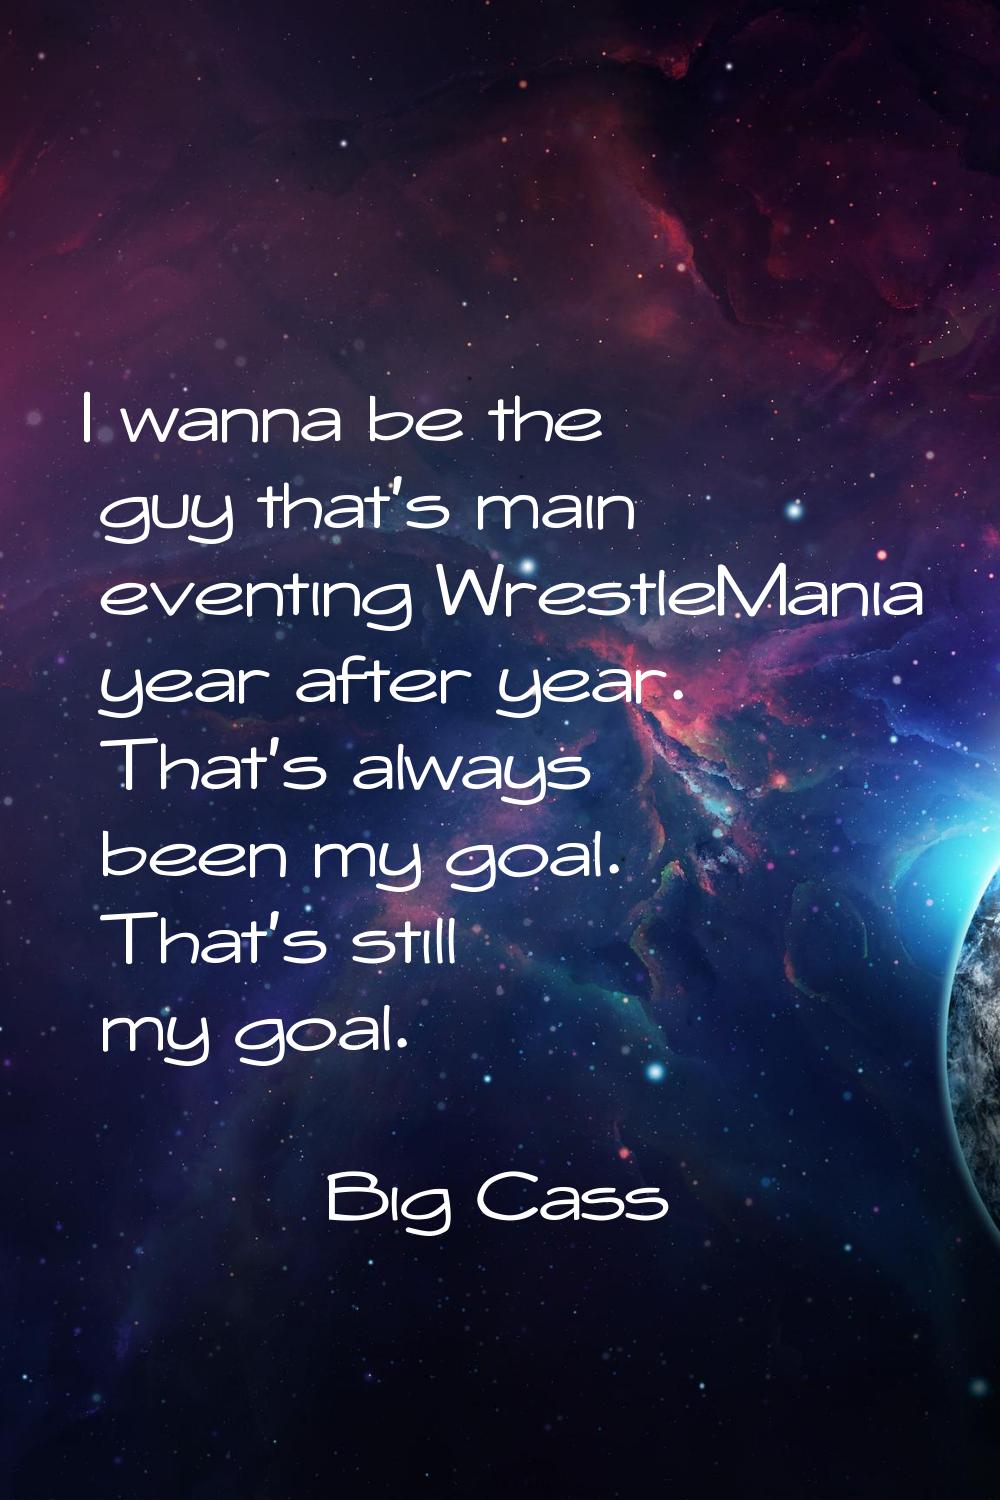 I wanna be the guy that's main eventing WrestleMania year after year. That's always been my goal. T